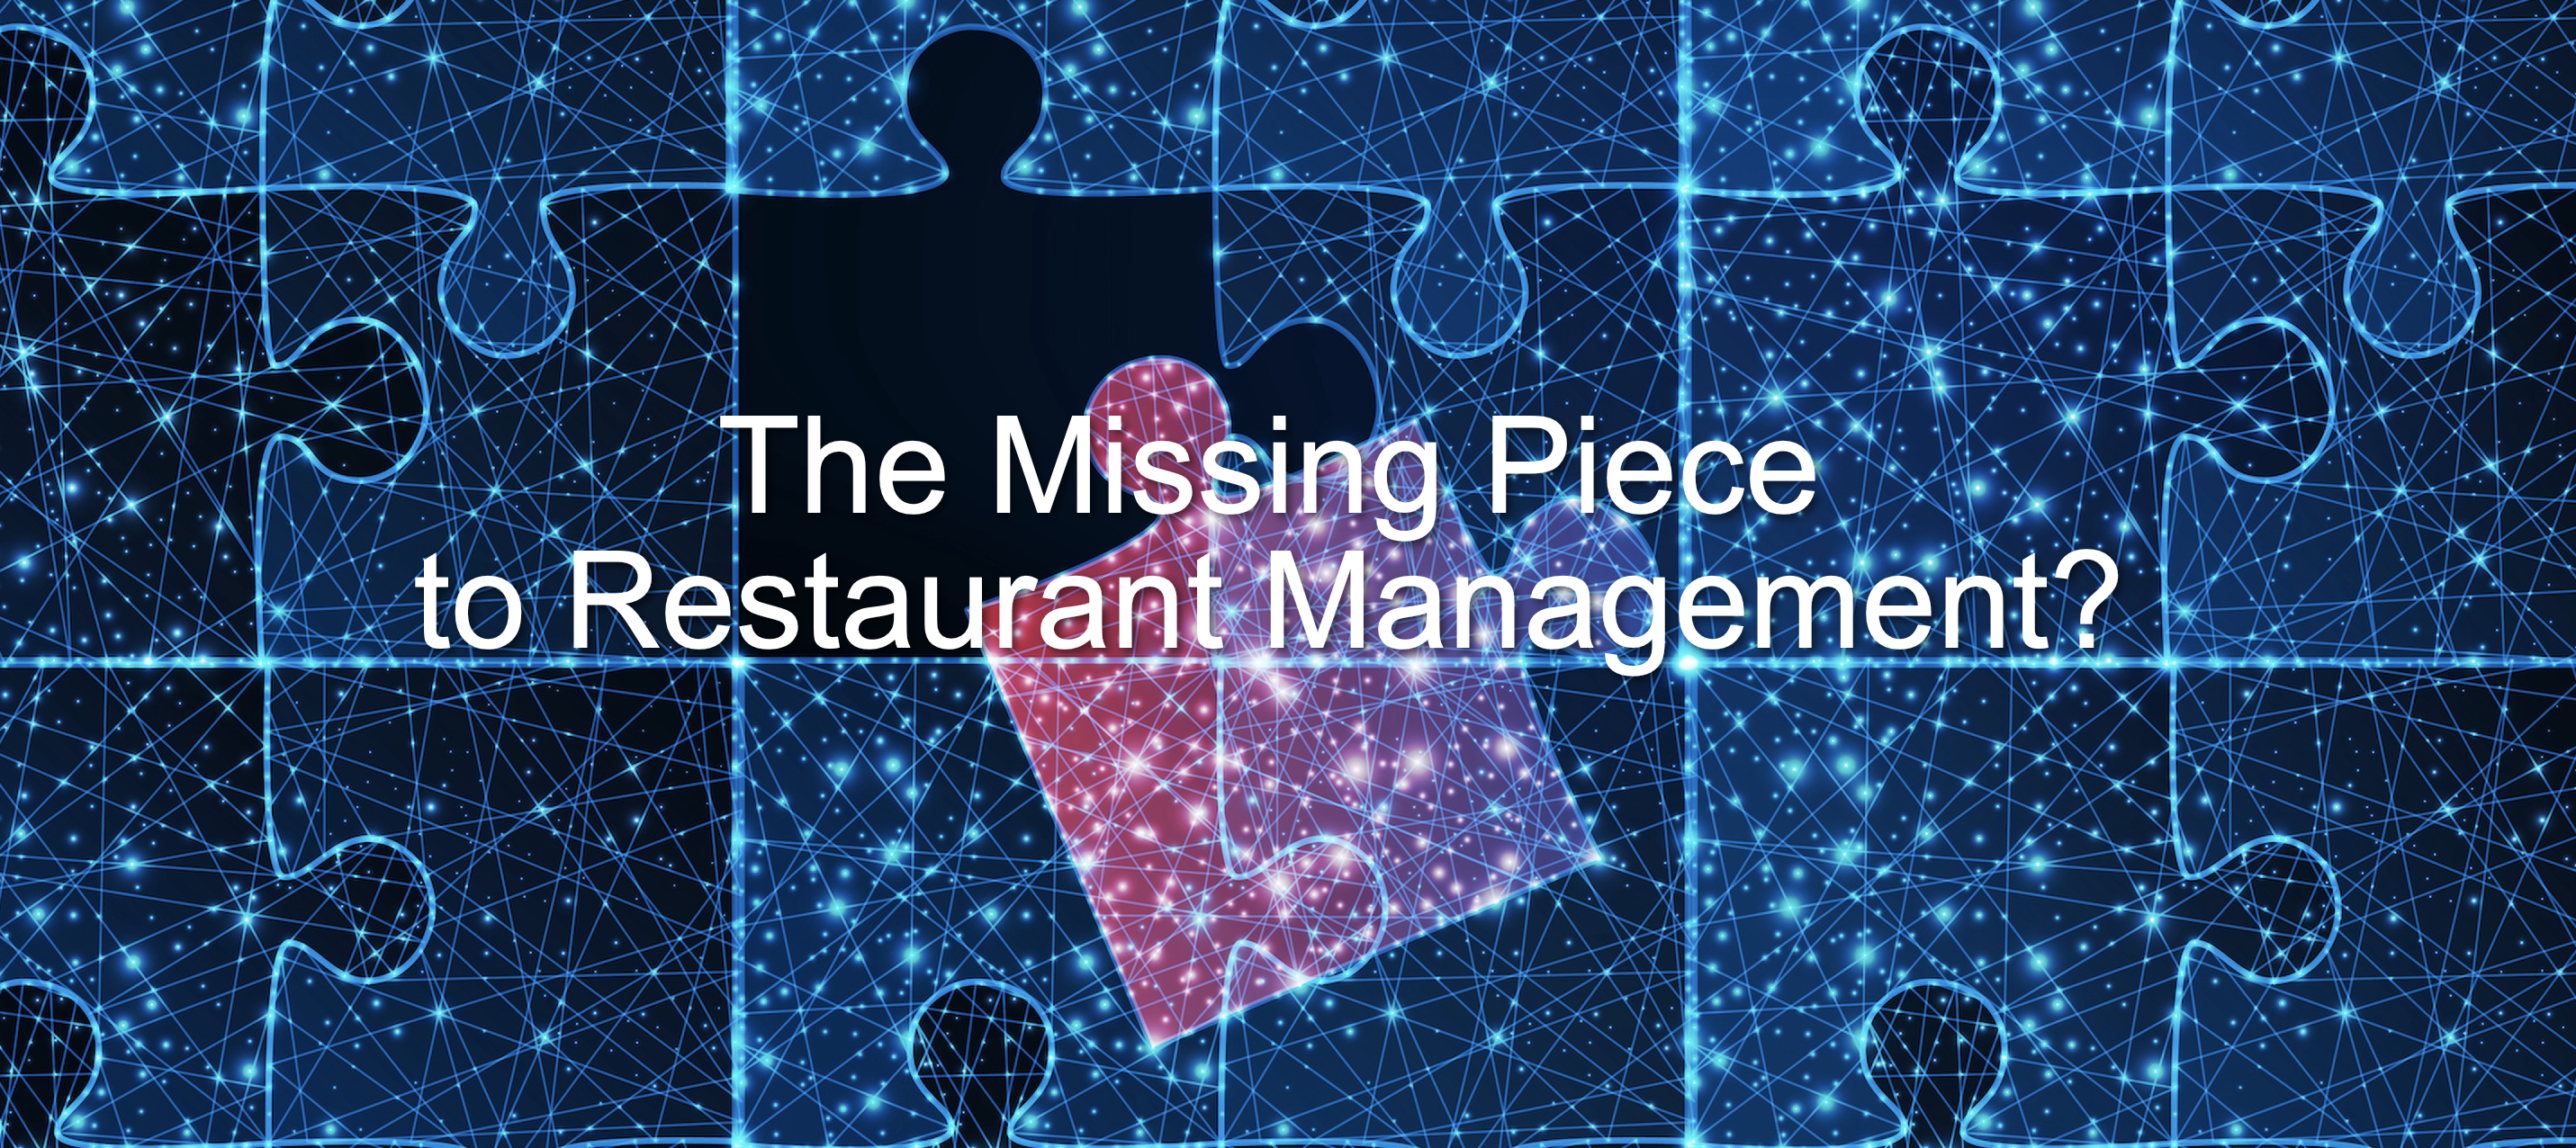 What are Restaurant Modules and How do they Help with Management?